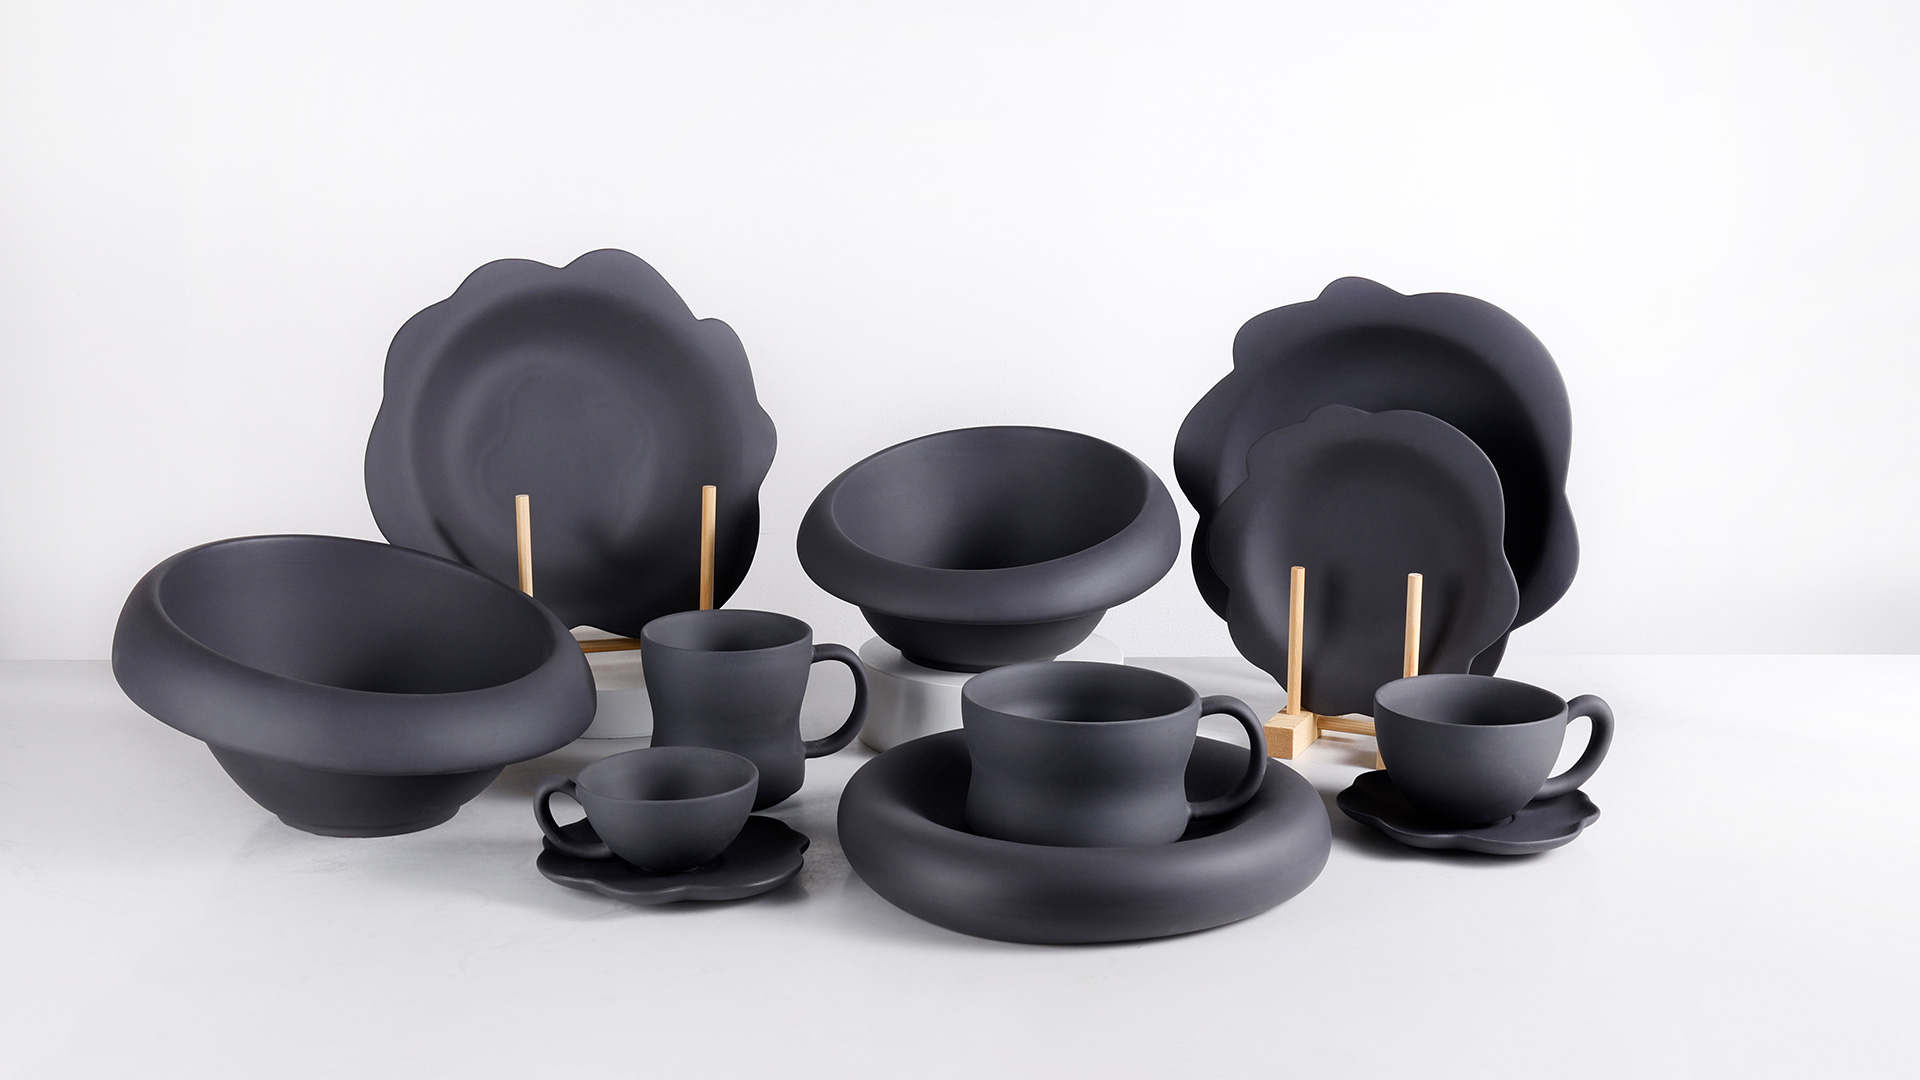 Black Earth Tableware Series: Inspired by the “Sea Moon” Jellyfish, 30 Years of Professional Experience in Design Excellence.